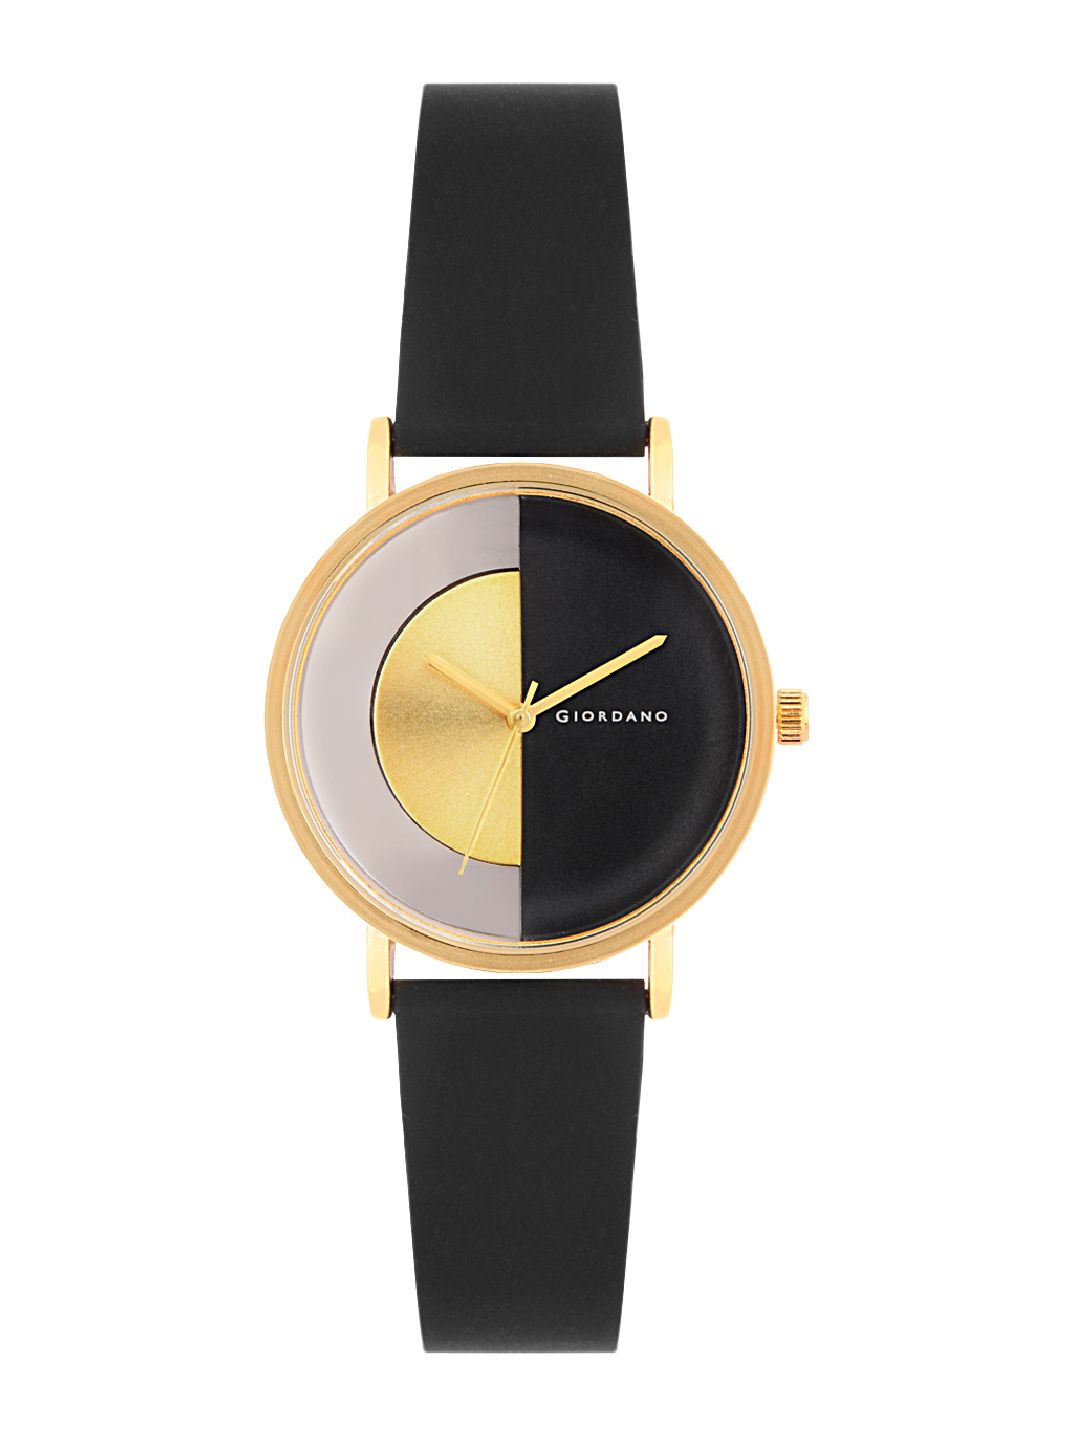 GIORDANO Women Black & Gold-Toned Analogue Watch C1169-02 Price in India